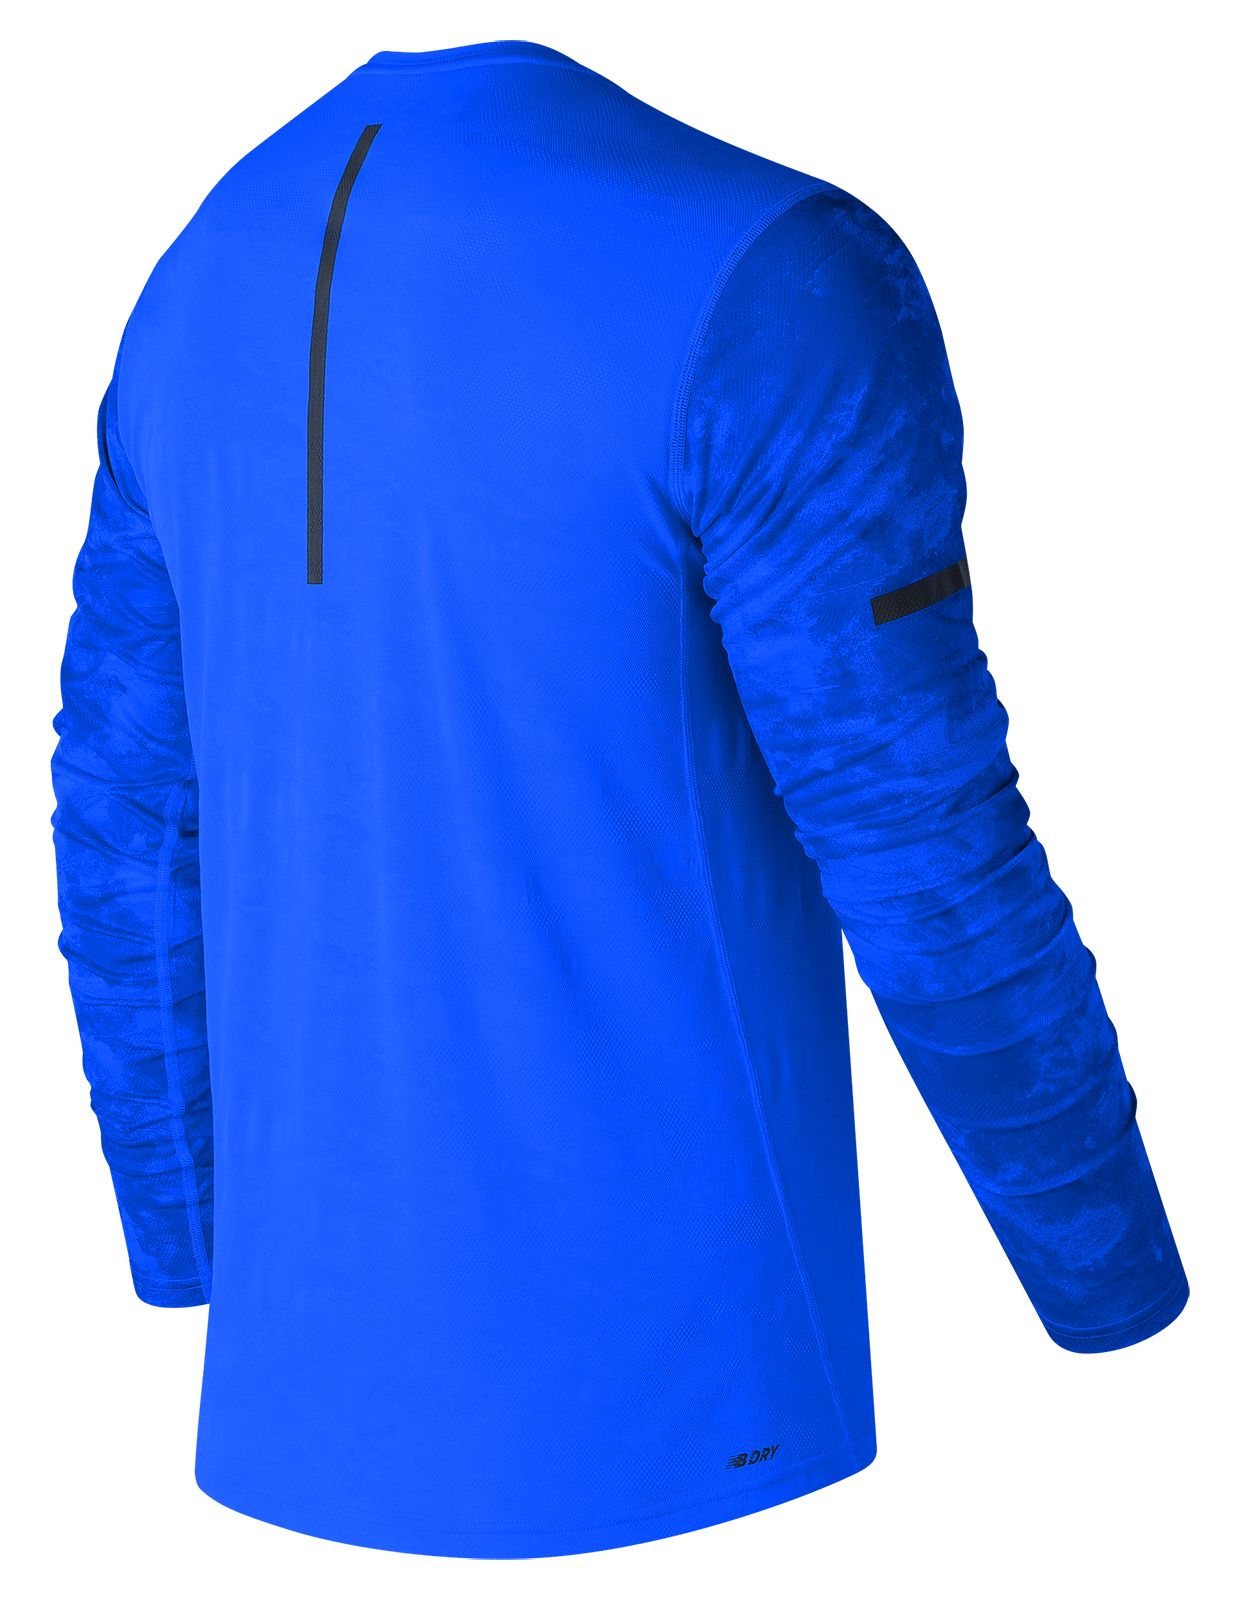 New Balance Max Intensity Long Sleeve Men’s 71049 Tops Performance Electric Blue with Atlantic I15c8536